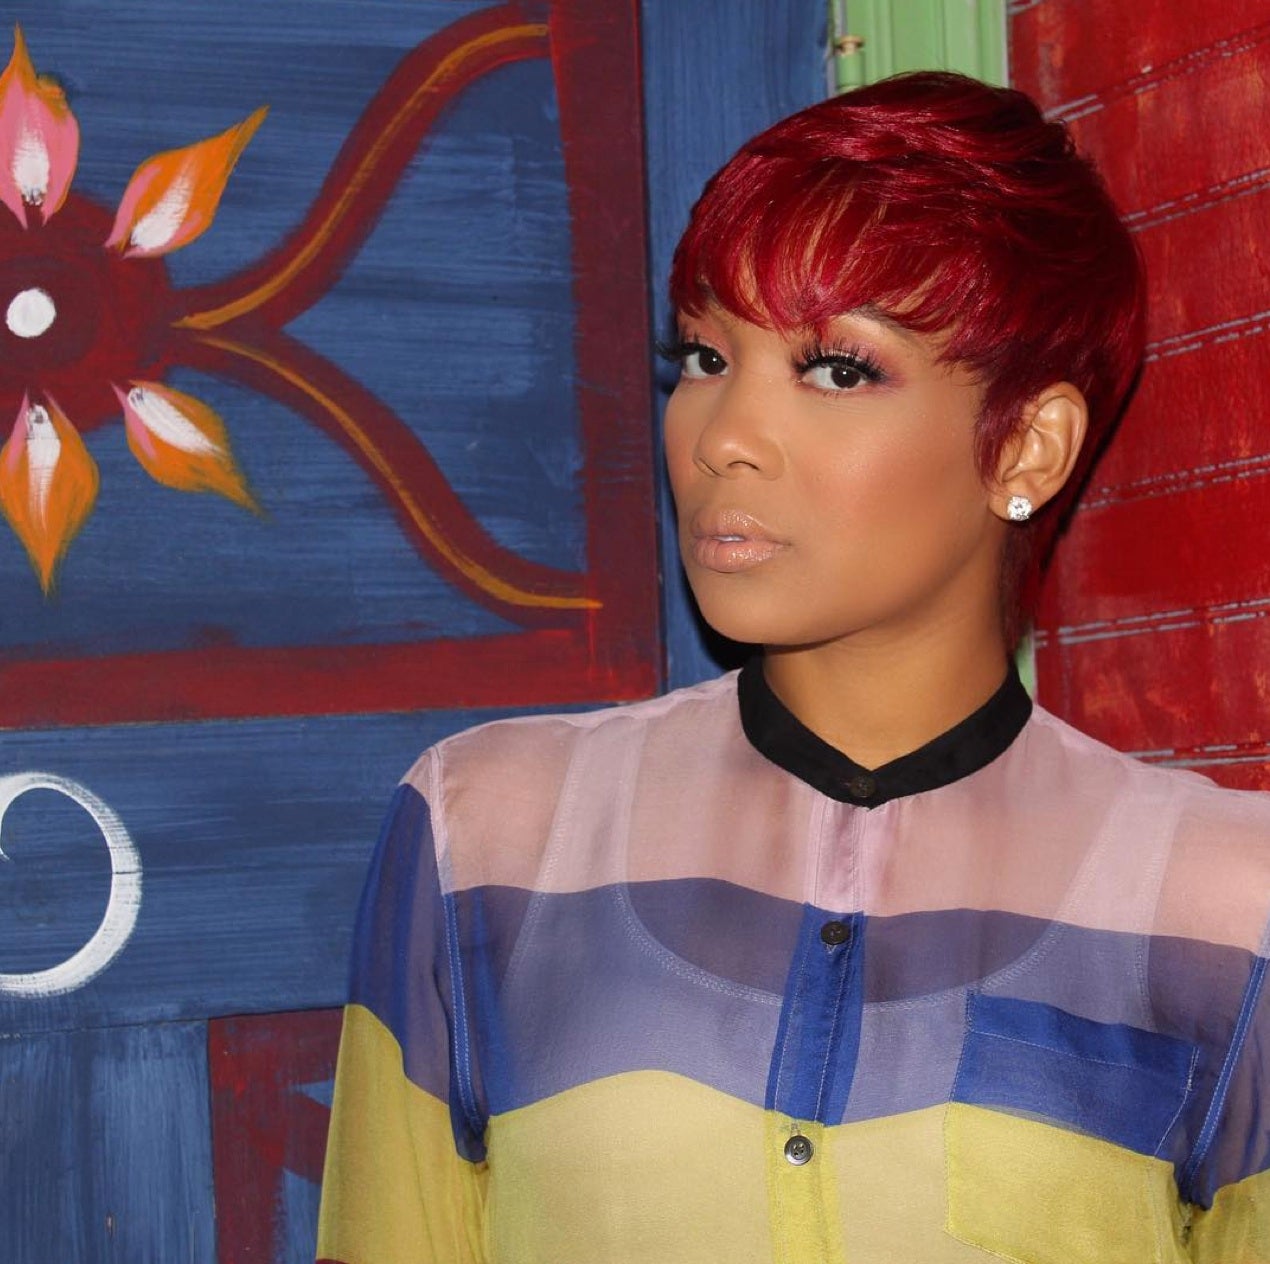 Our Fave #EssenceFest Instagram Hairstyles
